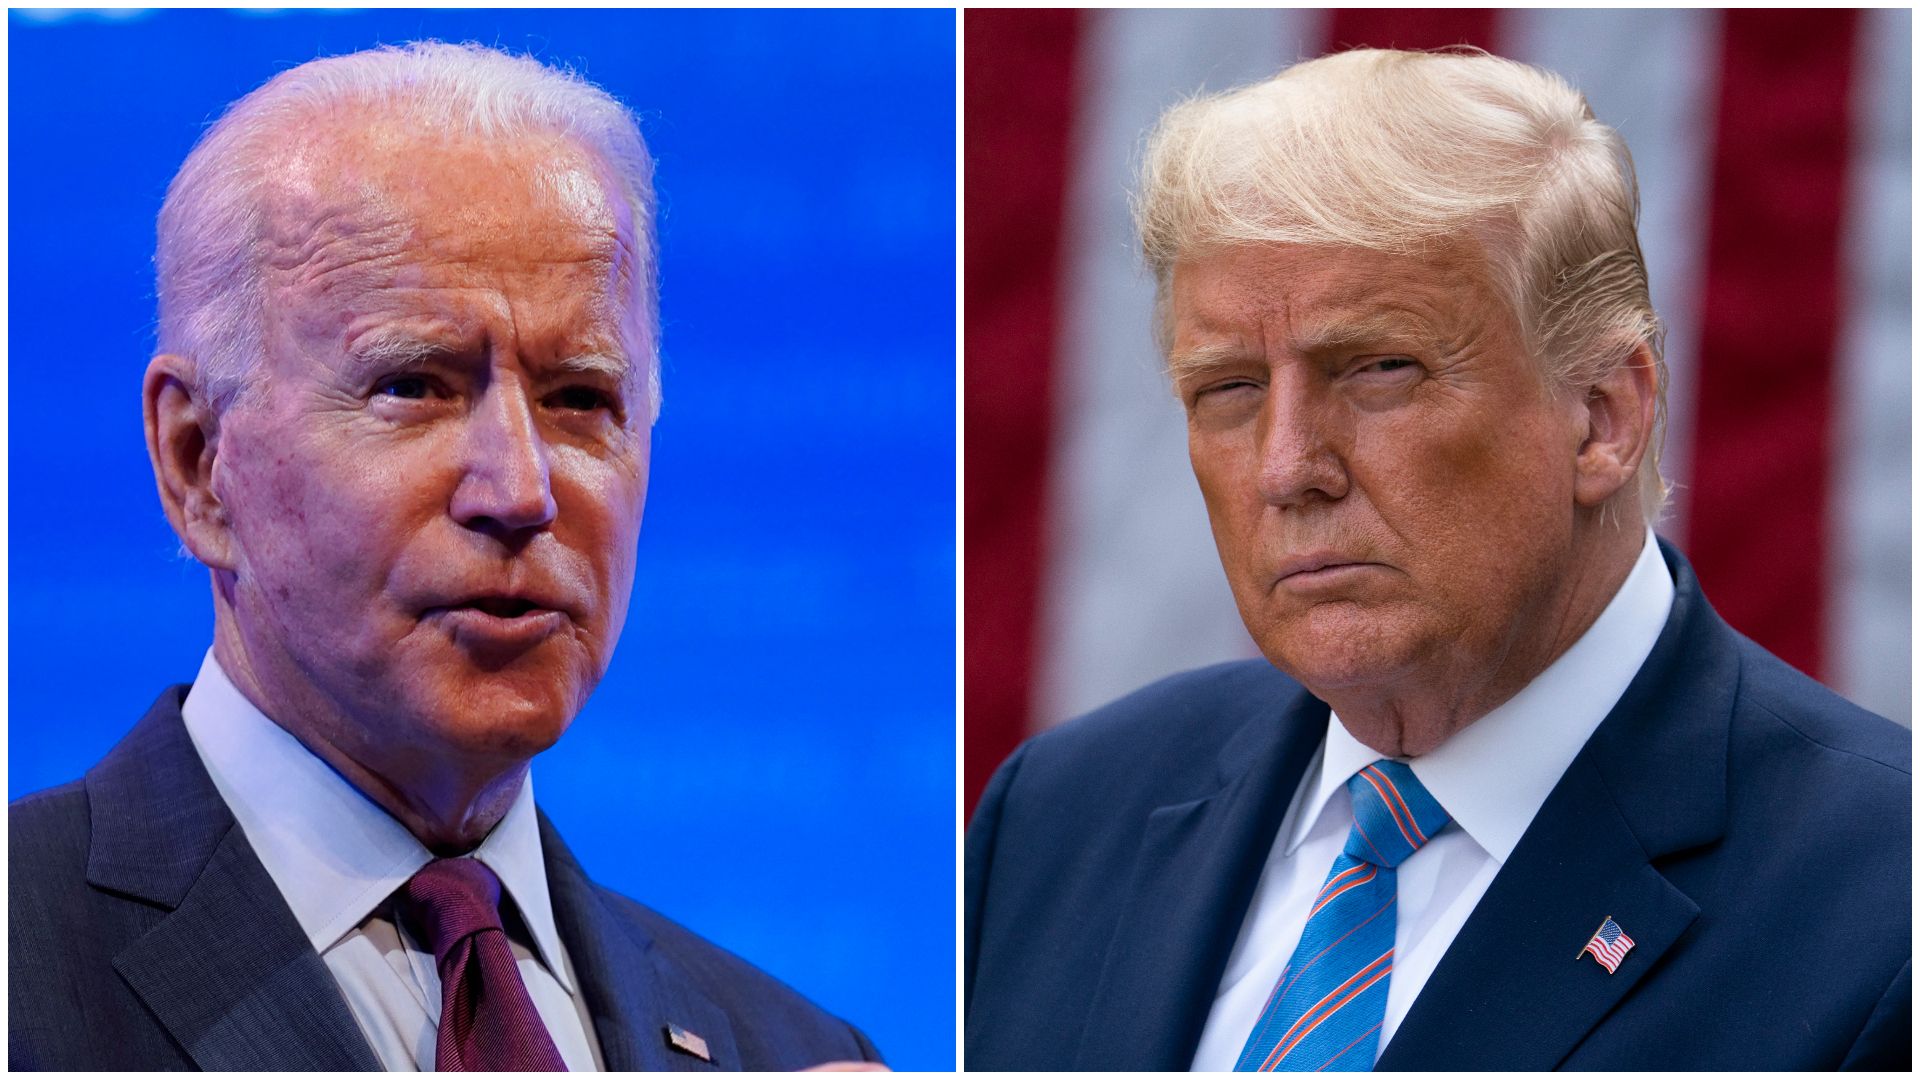 Donald Trump v Joe Biden: The most consequential debate in history? The Great Showdown is imminent